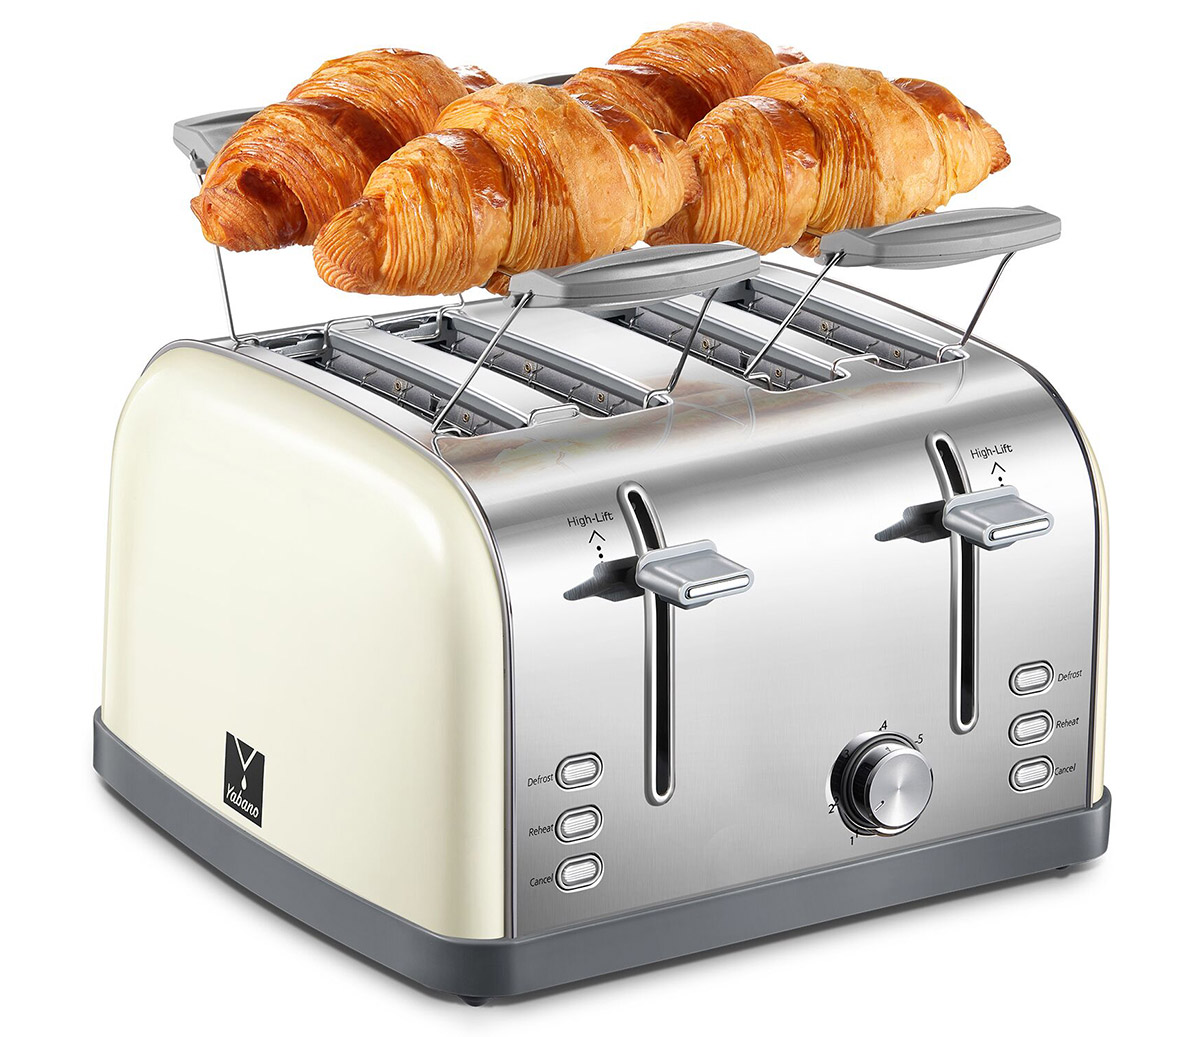 4 slice toaster, Retro Bagel Toaster Toaster with 7 Bread Shade Settings, 4 Extra Wide Slots, Defrost/Bagel/Cancel Function, Removable Crumb Tray, Stainless Steel Toaster by Yabano